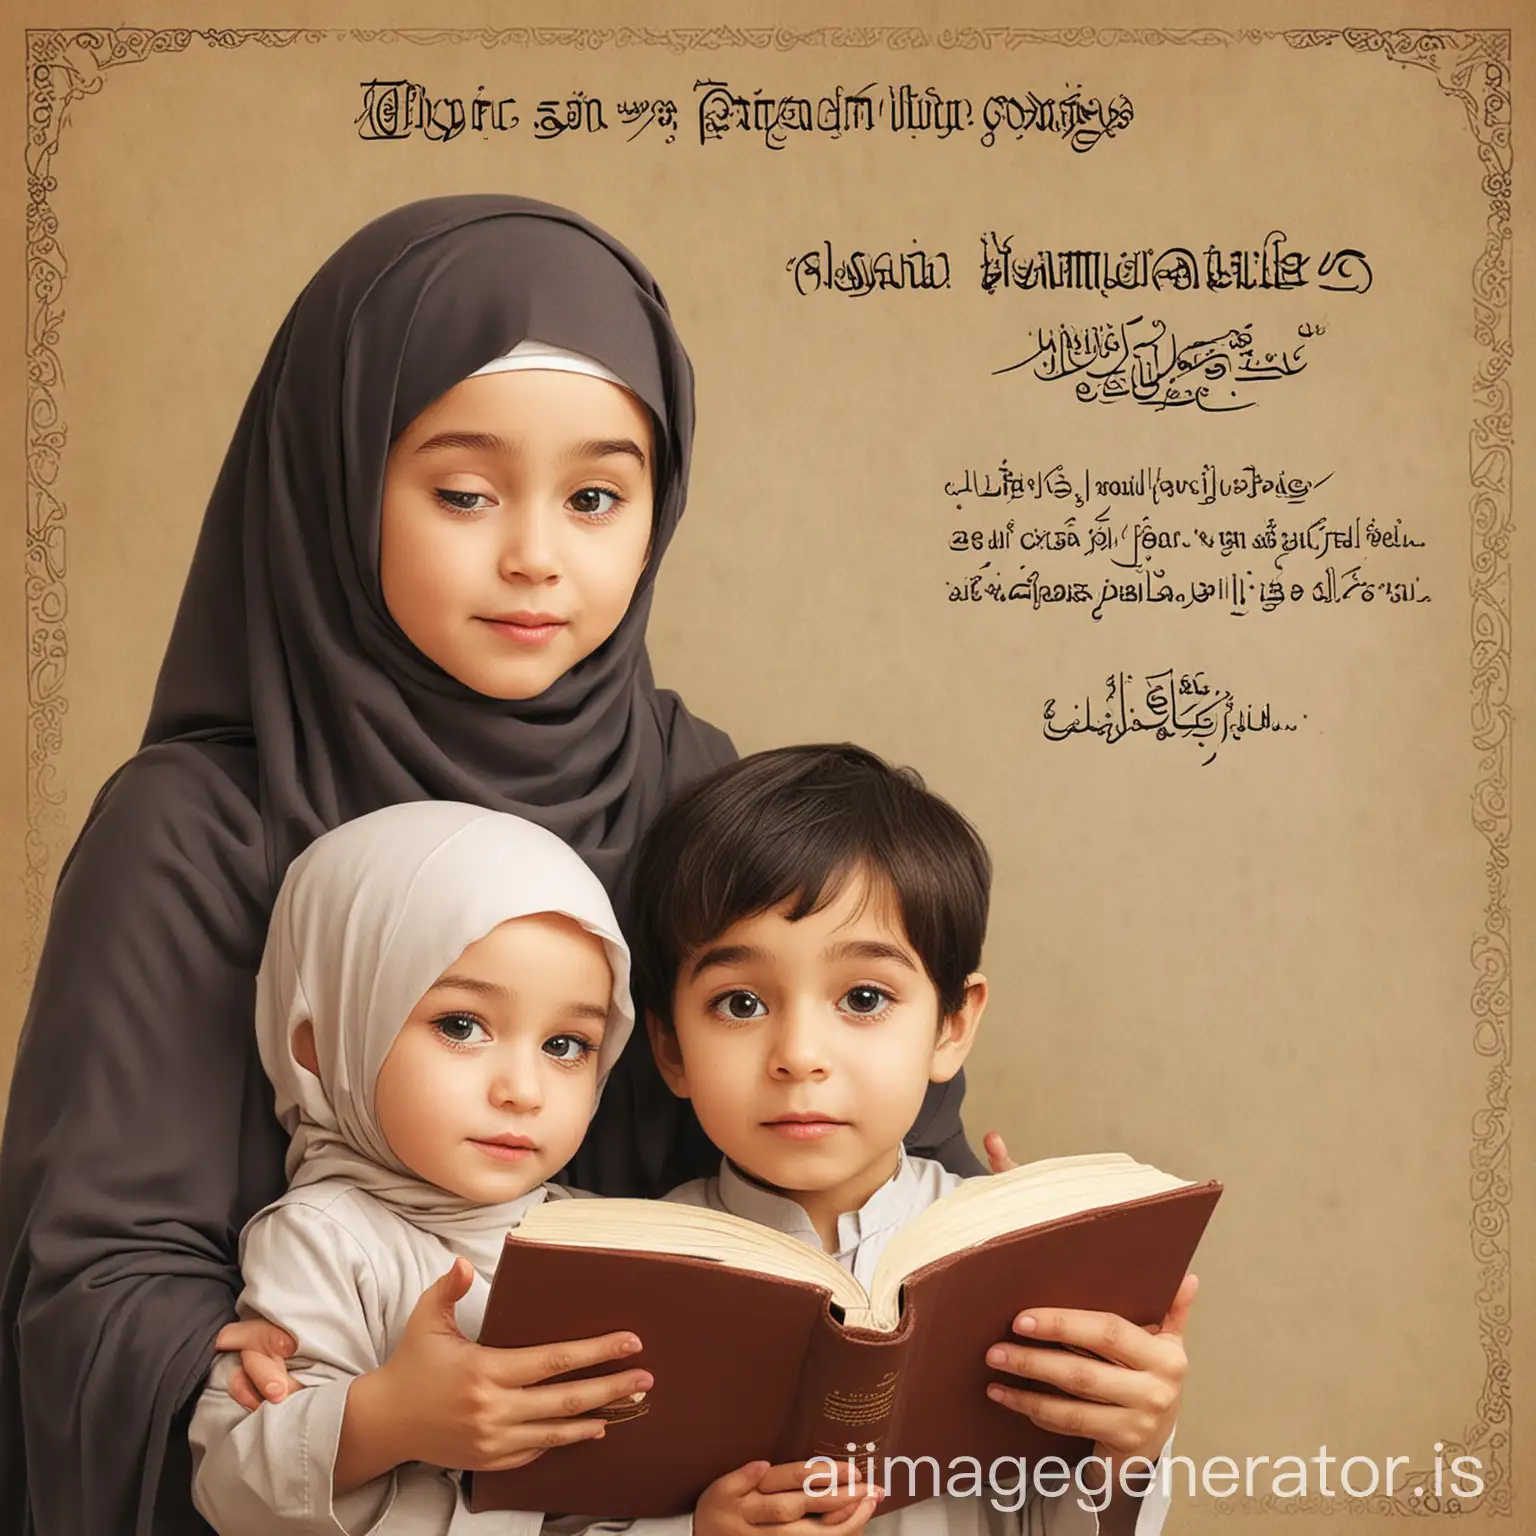 title 3P : Islamic Parenting with Patience and Prayer
for a cover page of a book. 2 boy 1 girl